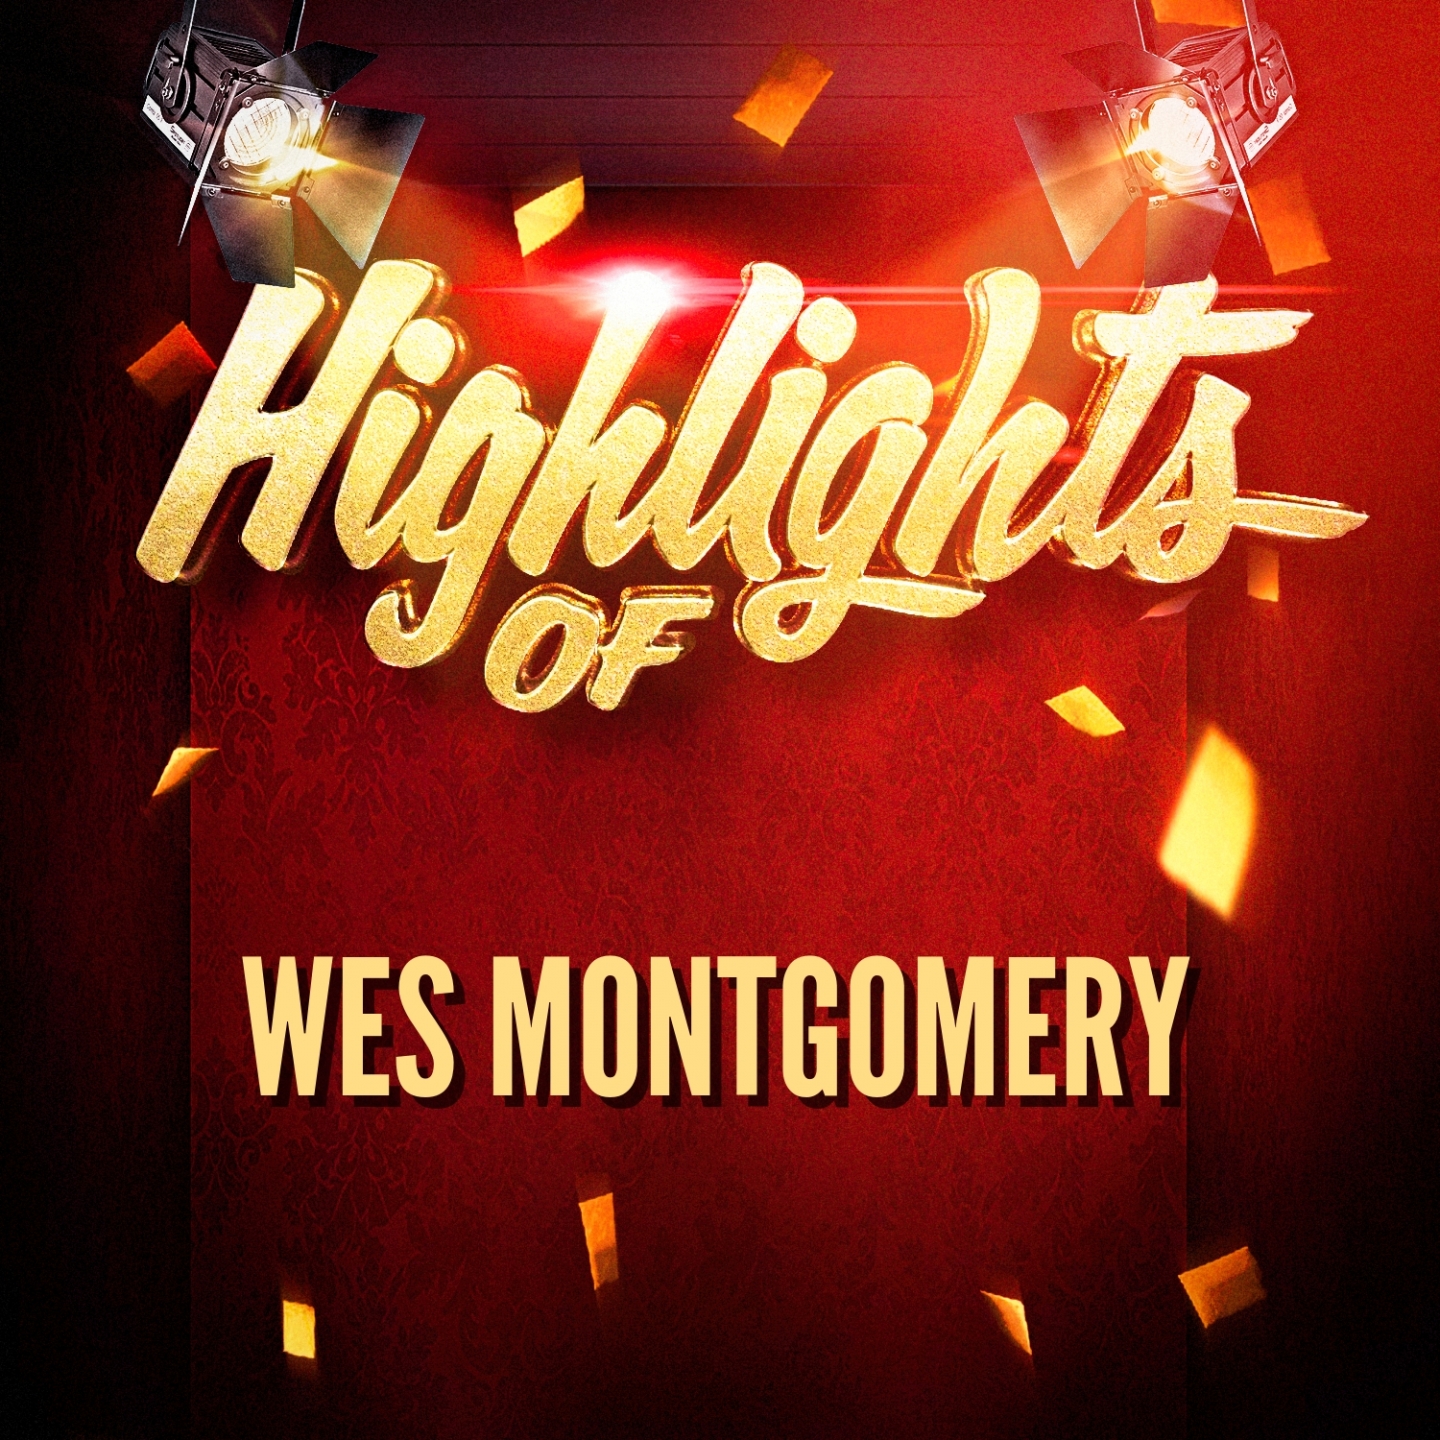 Highlights of Wes Montgomery